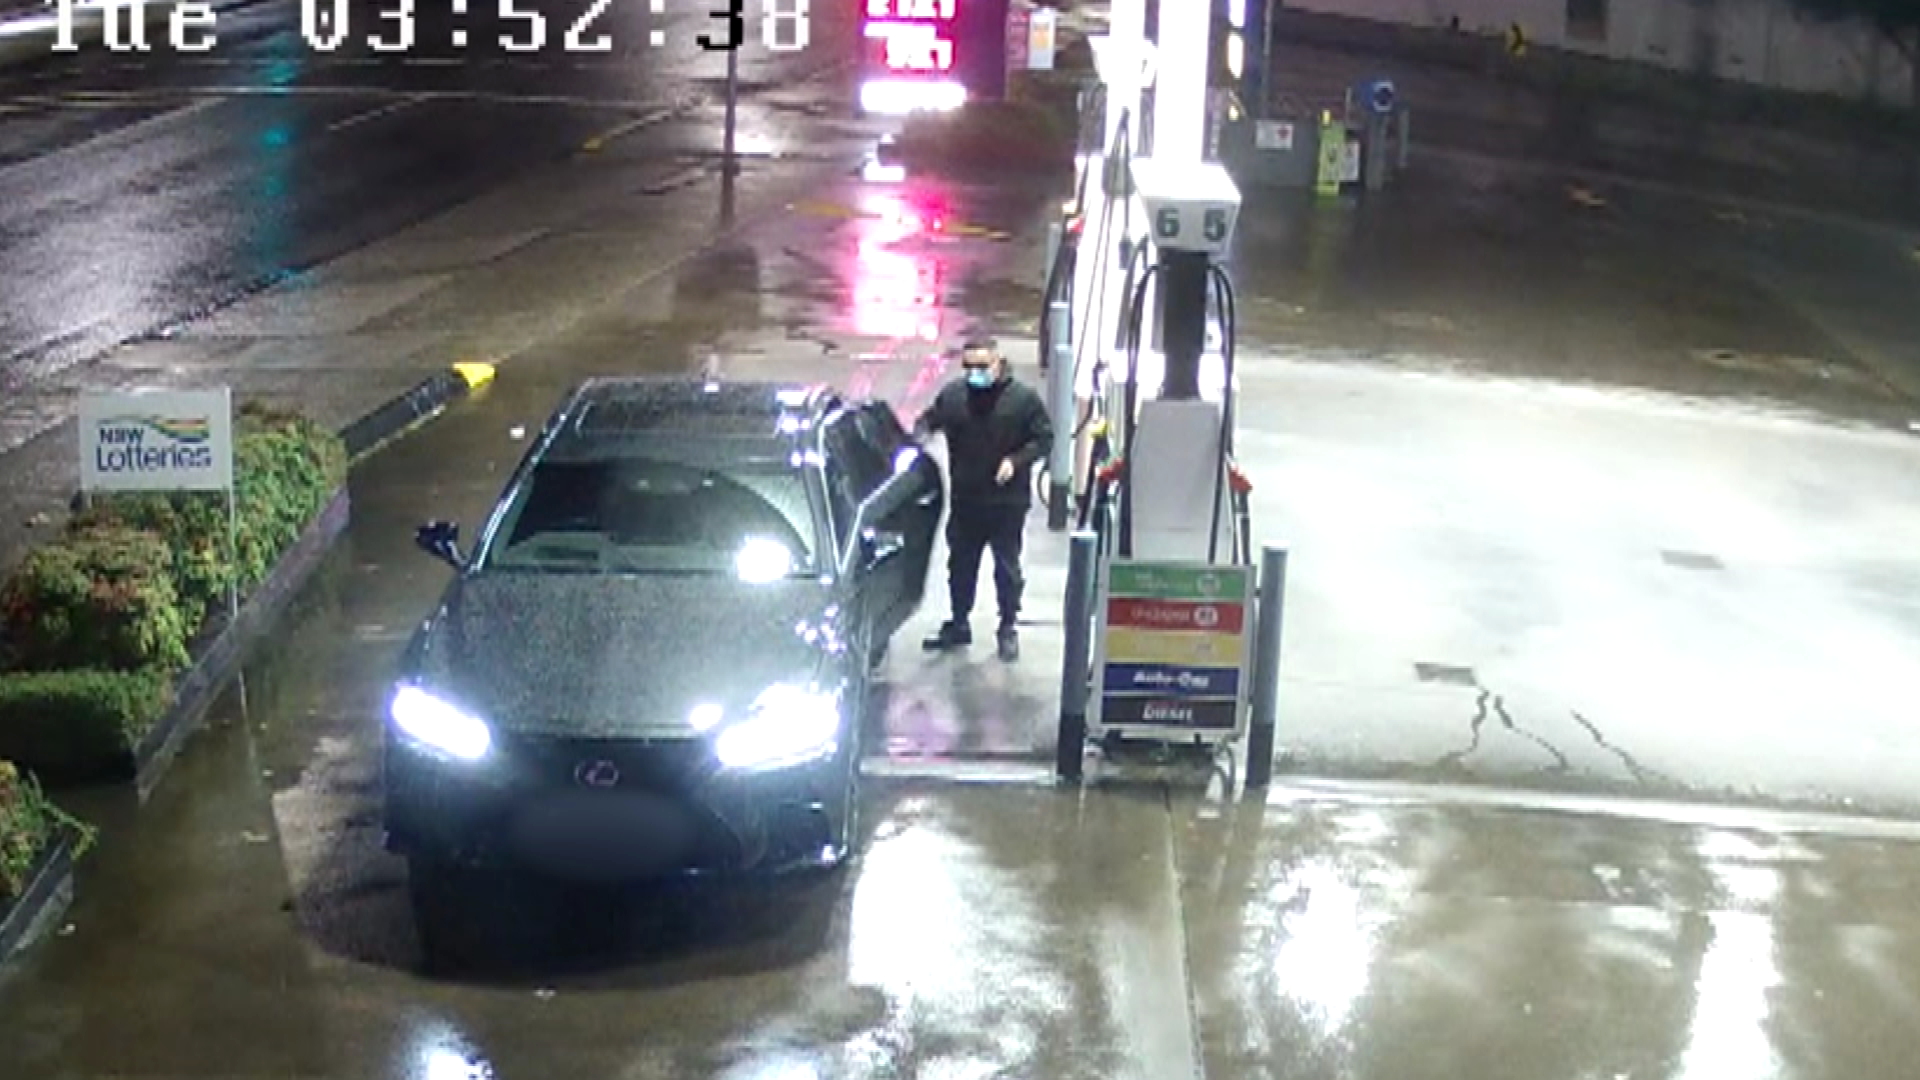 Thieves targeting Sydney petrol stations, CCTV shows thieves driving off without paying.